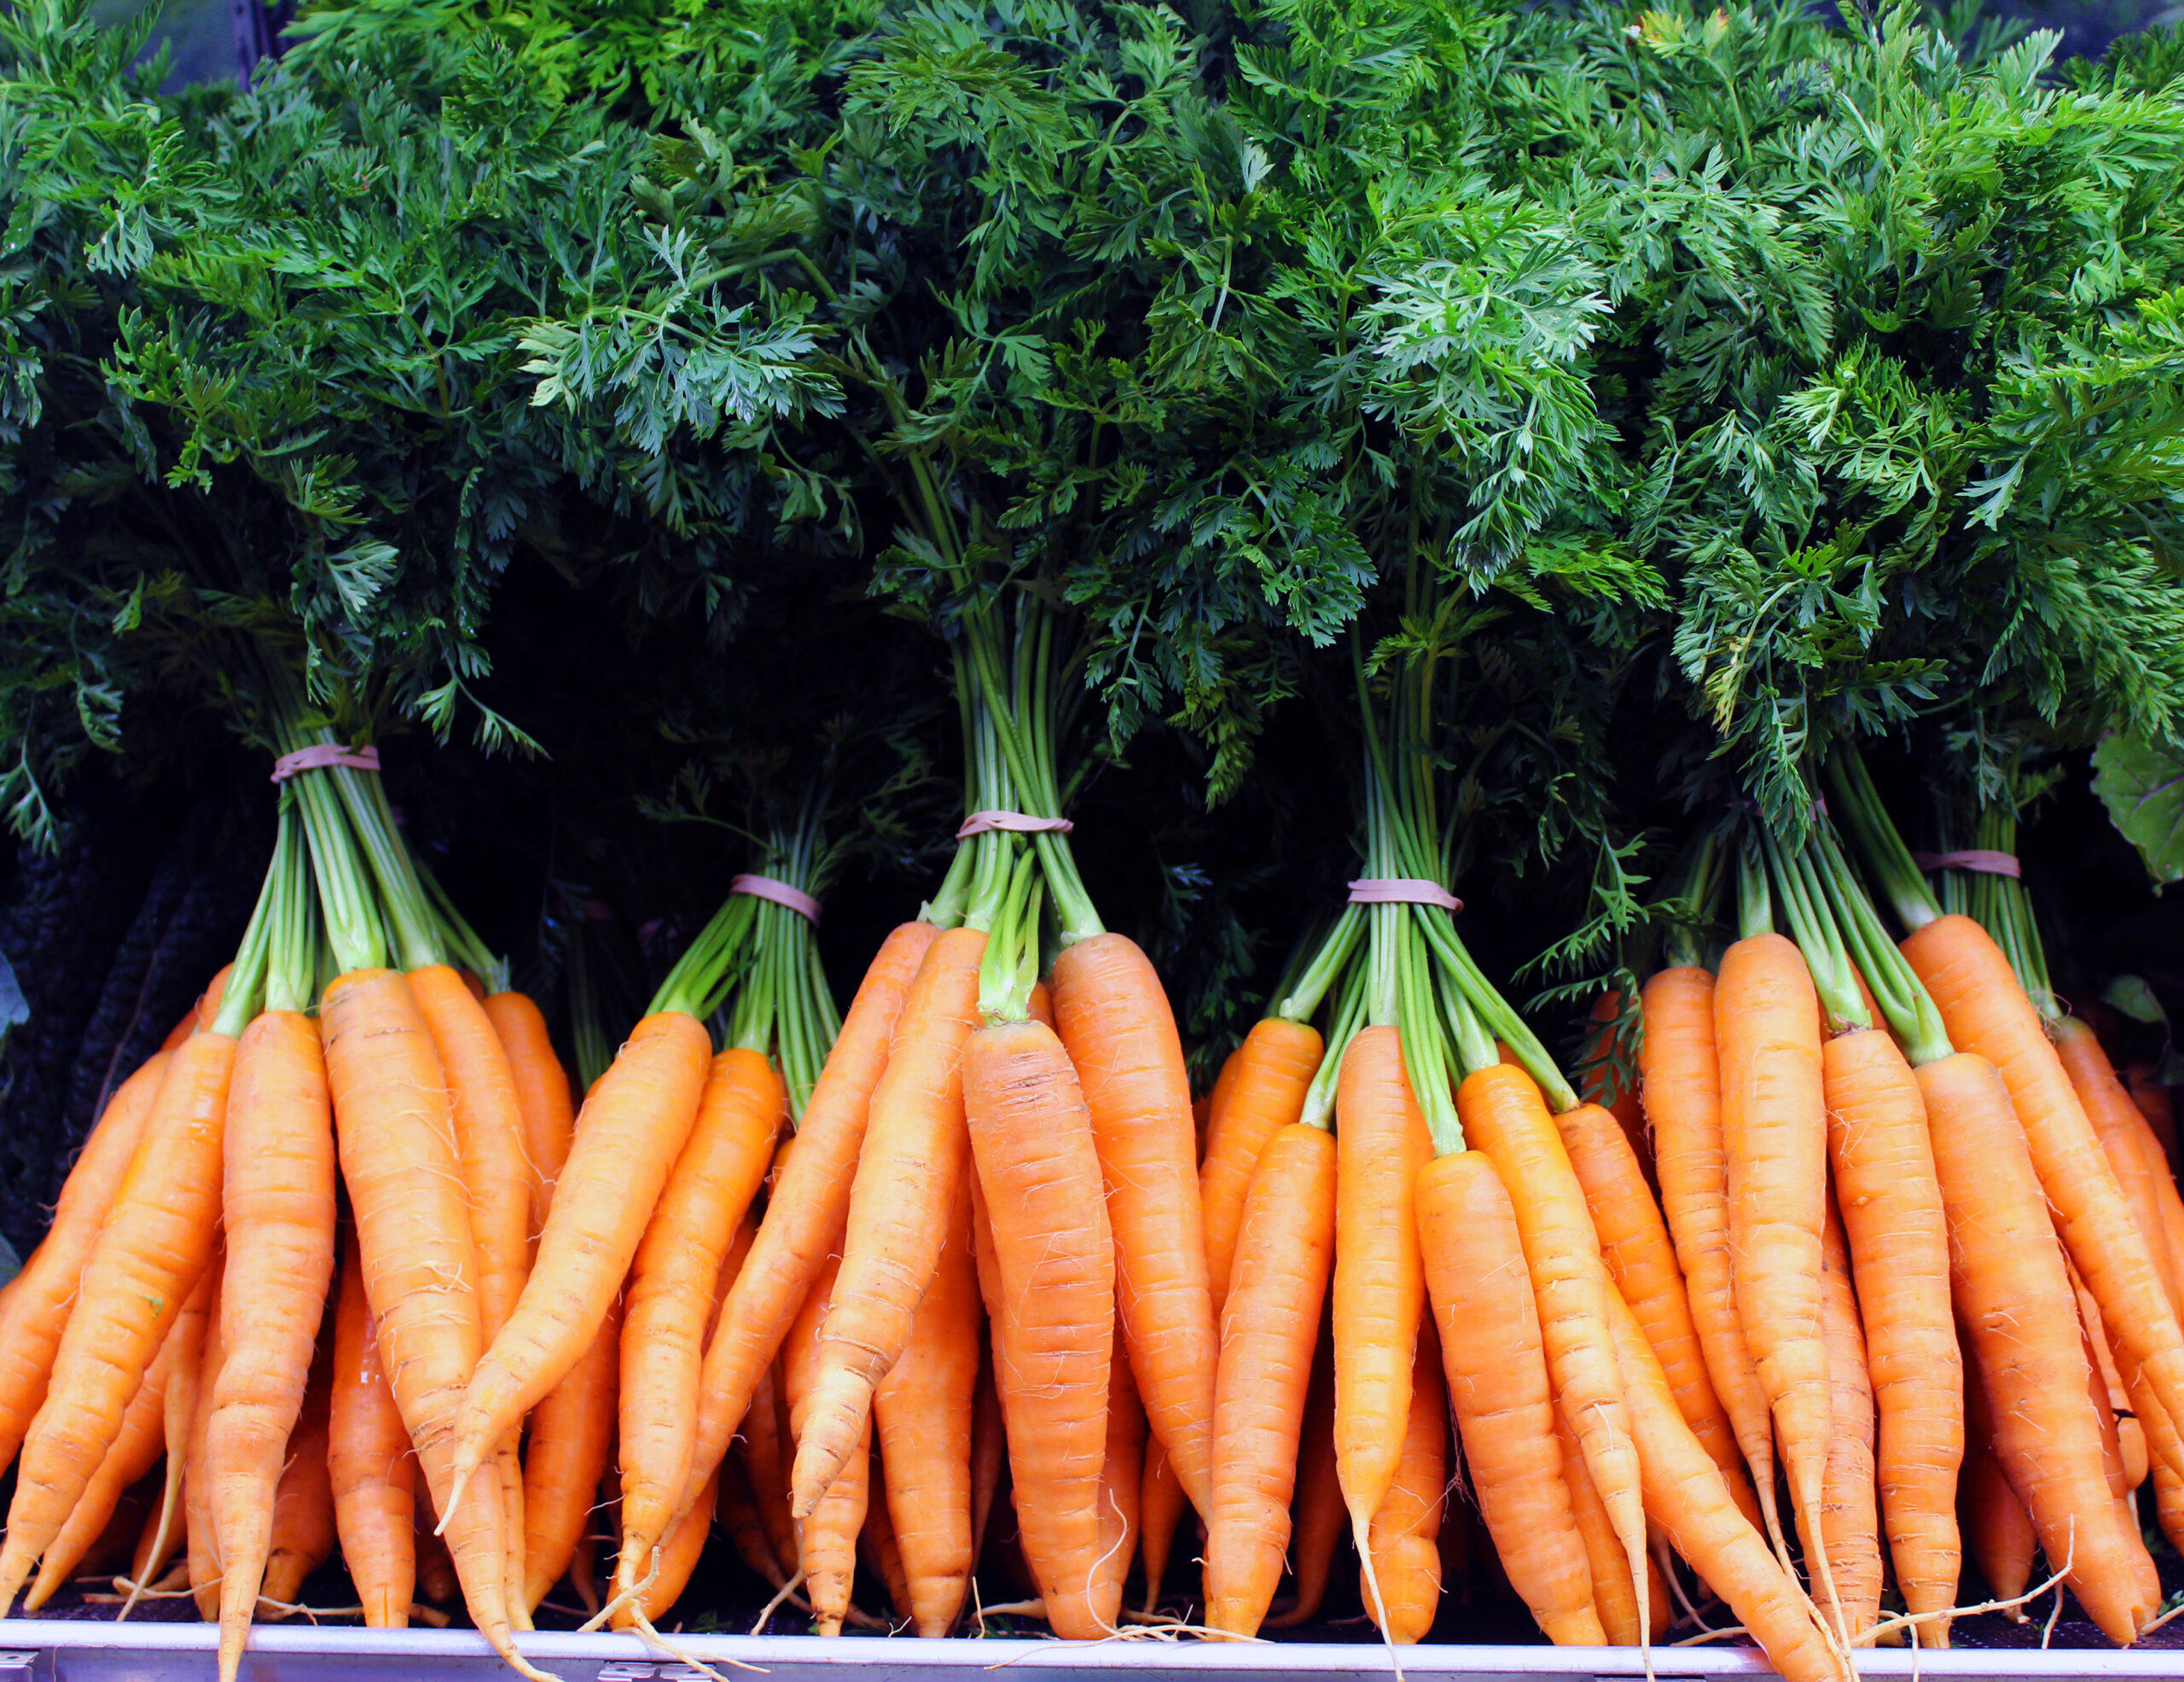 carrots-in-store-7-18-15